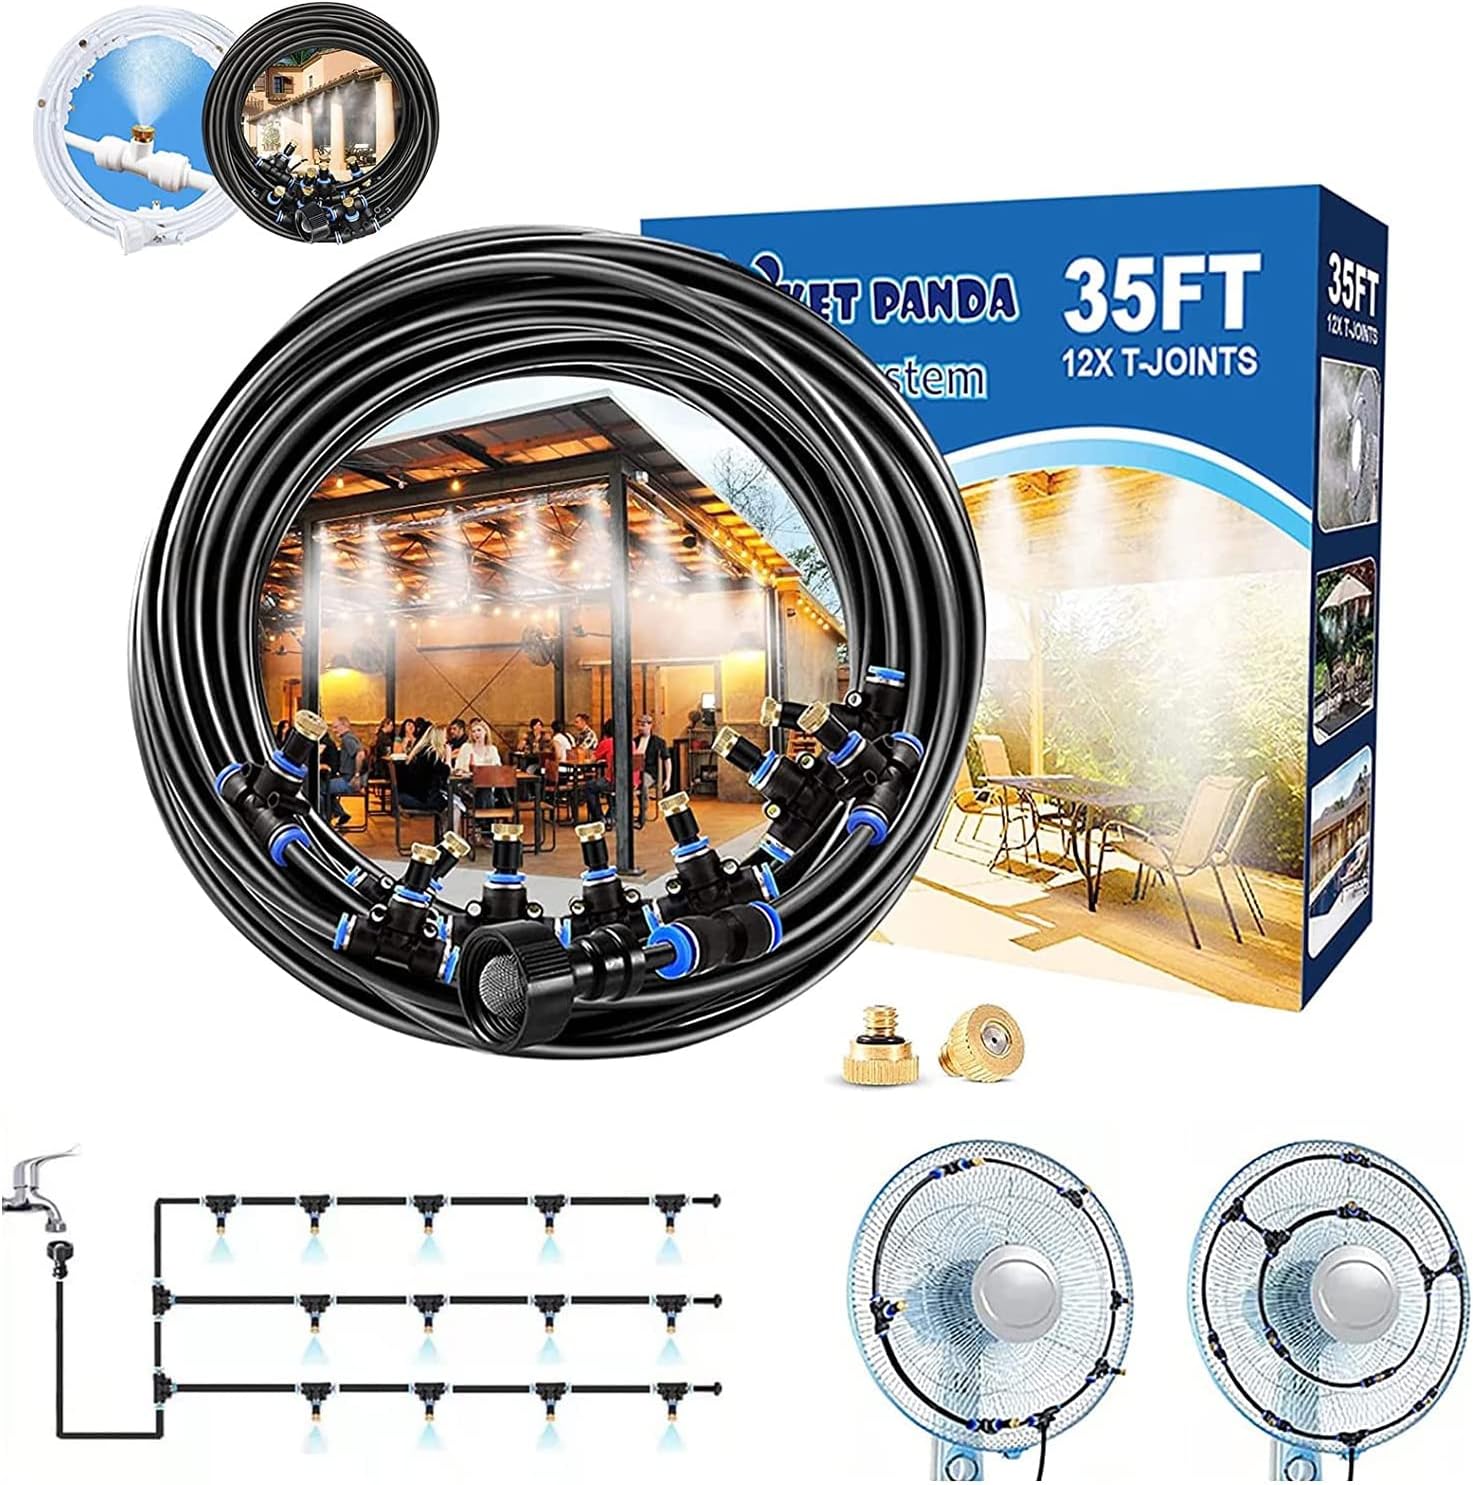 35FT Misting Cooling System, Outdoor Water Mister System for Porch